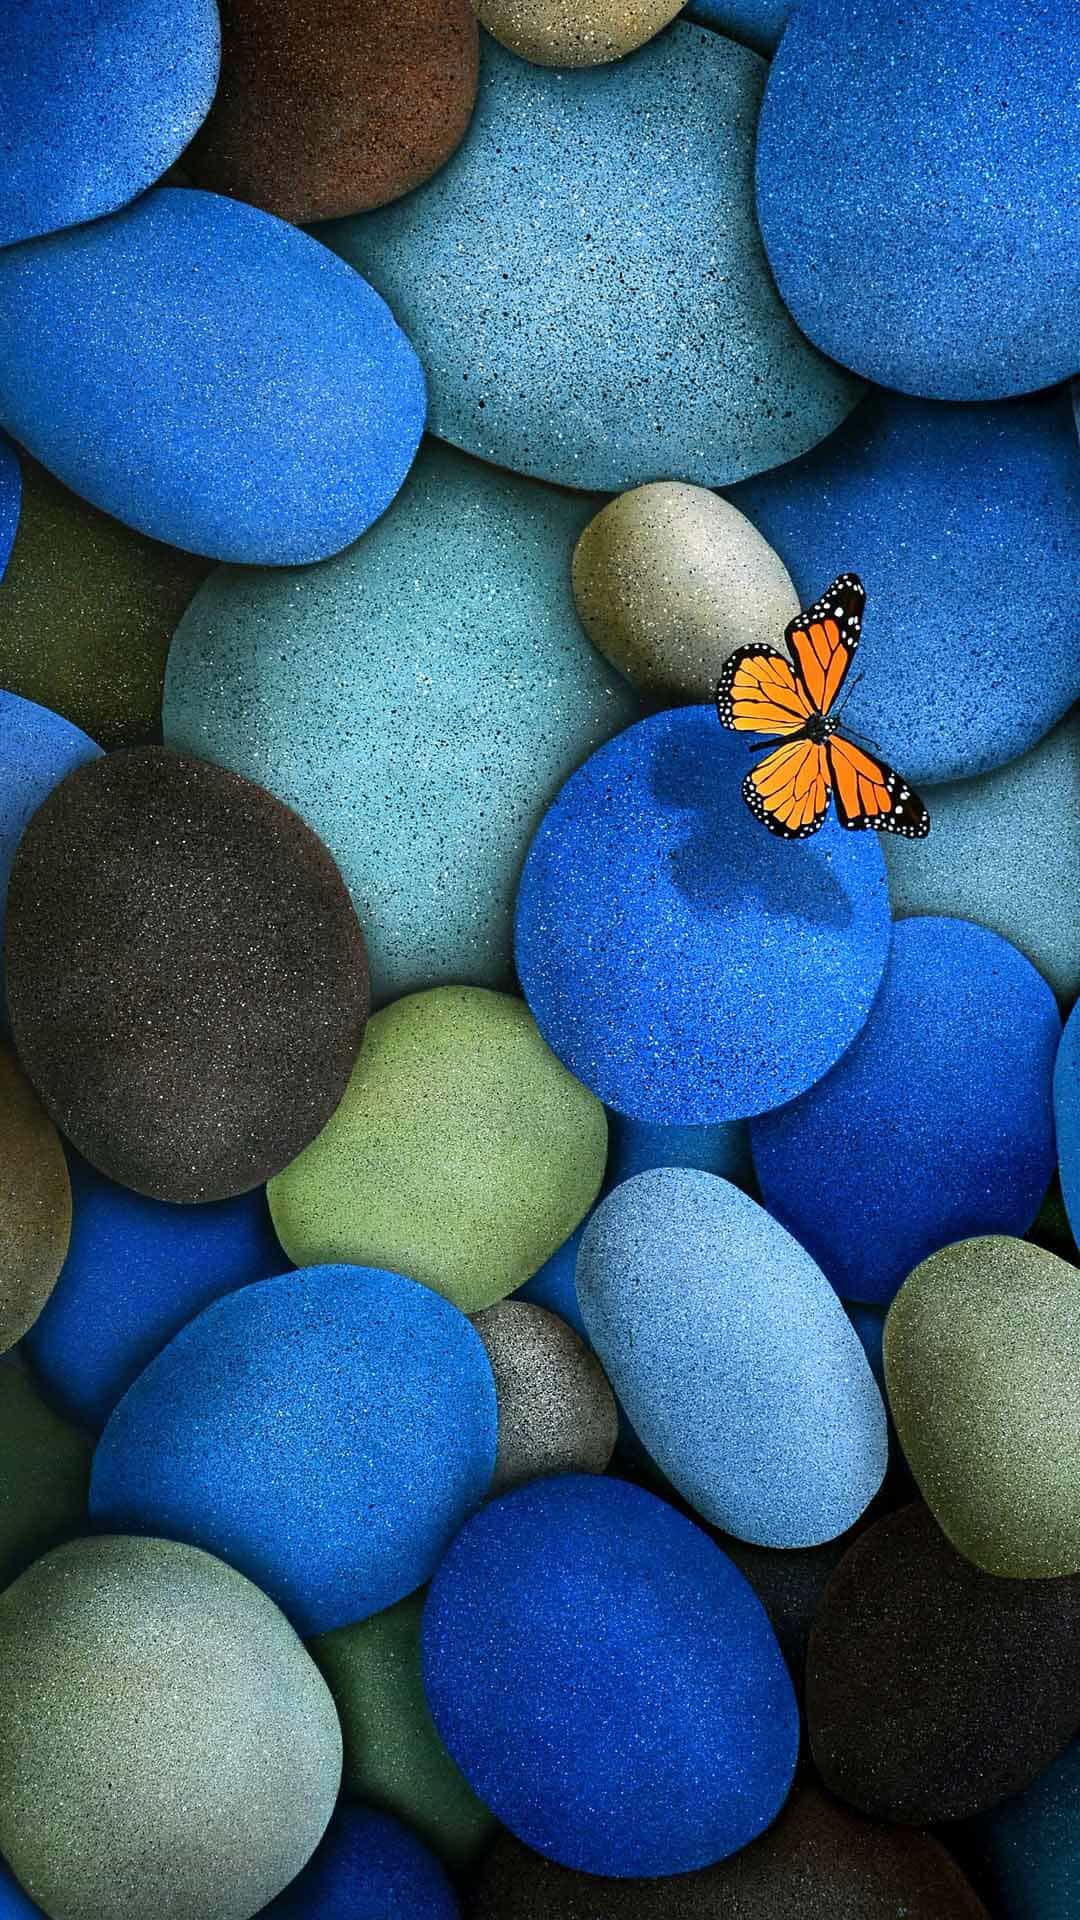 Blue Pebbles Orange Butterfly Android Wallpaper